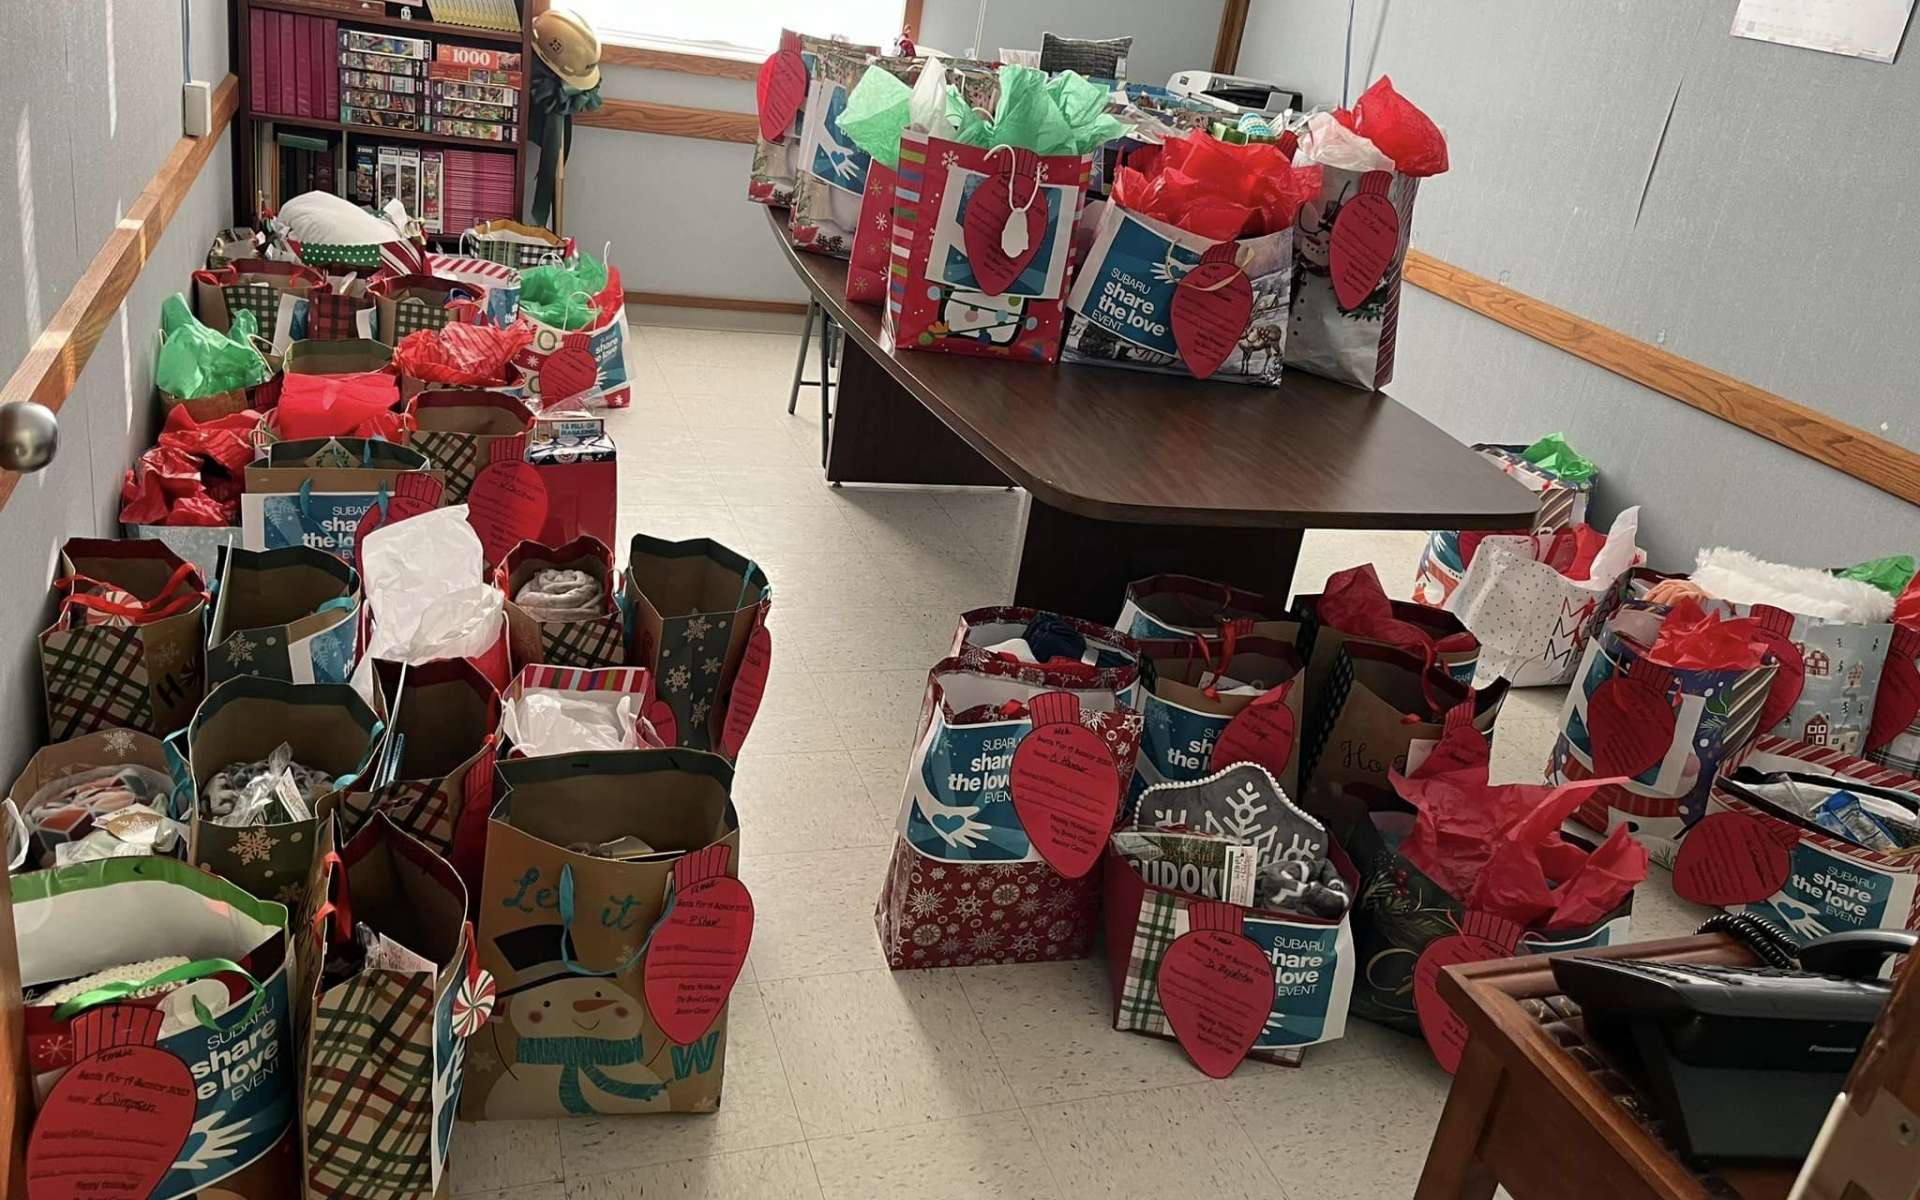 We were able to put together gift bags for 93 of our area seniors! Thank you all for sharing the love!